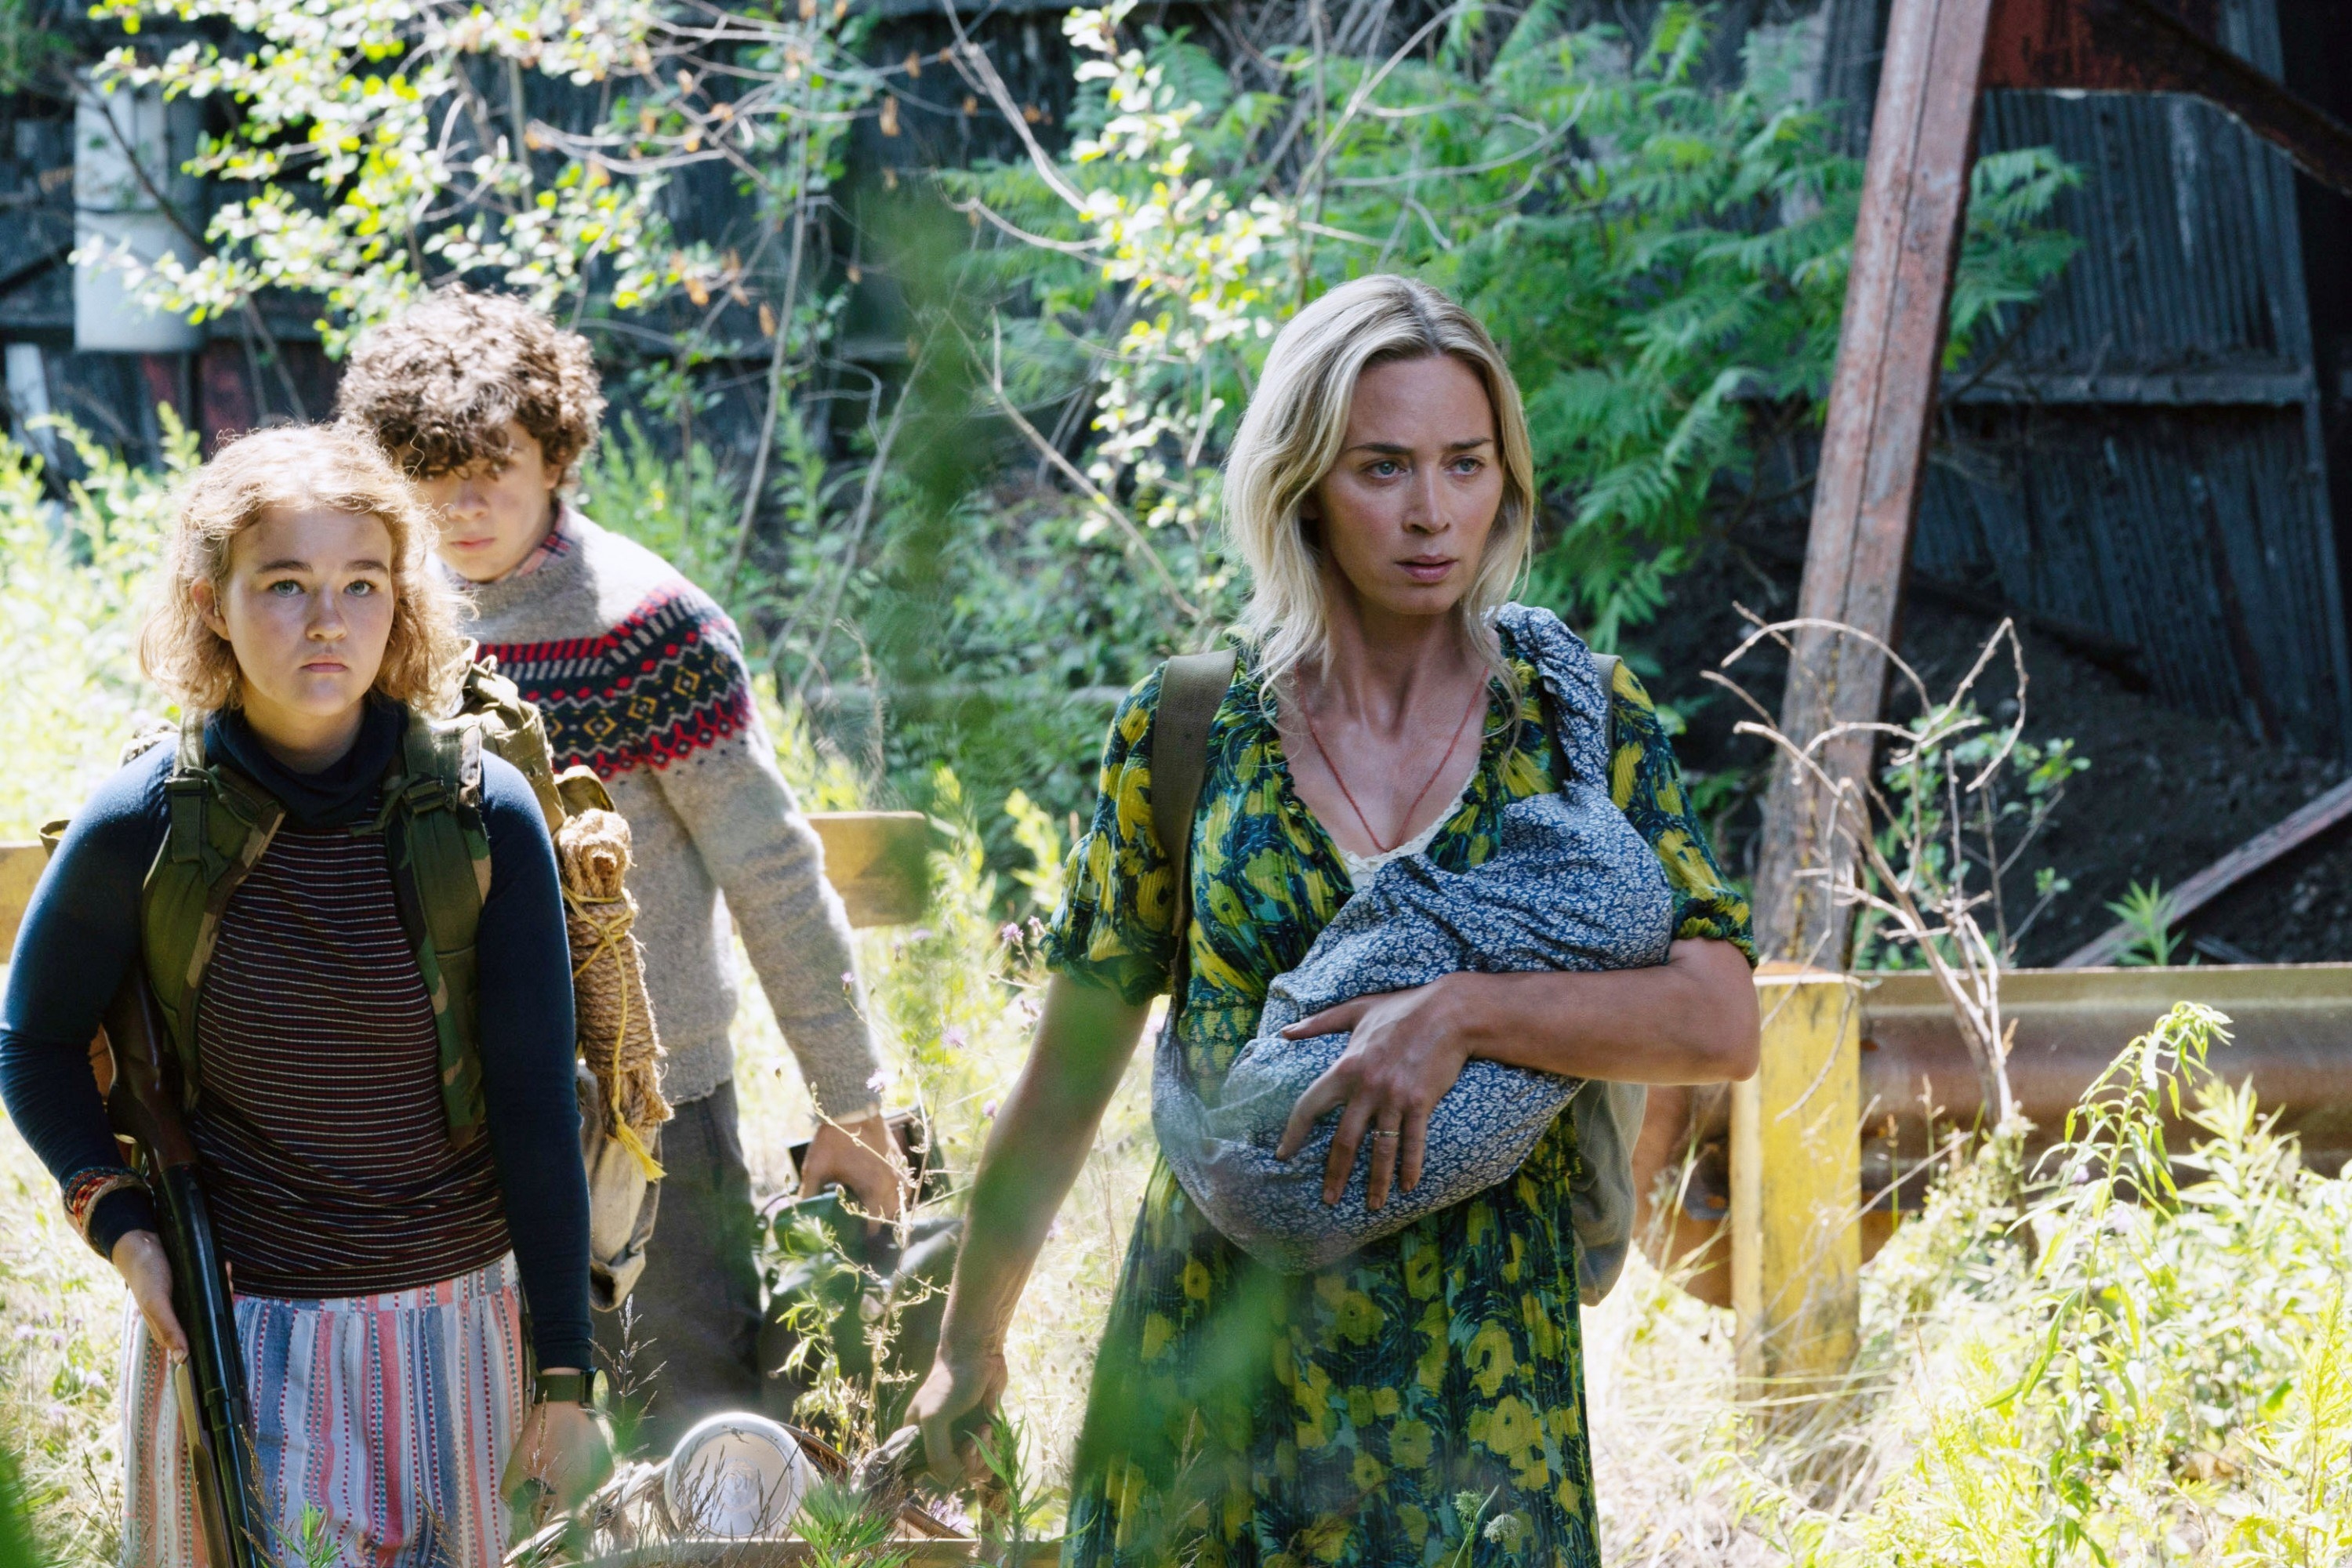 Emily Blunt leads Millicent Simmonds and Noah Jupe through weeds